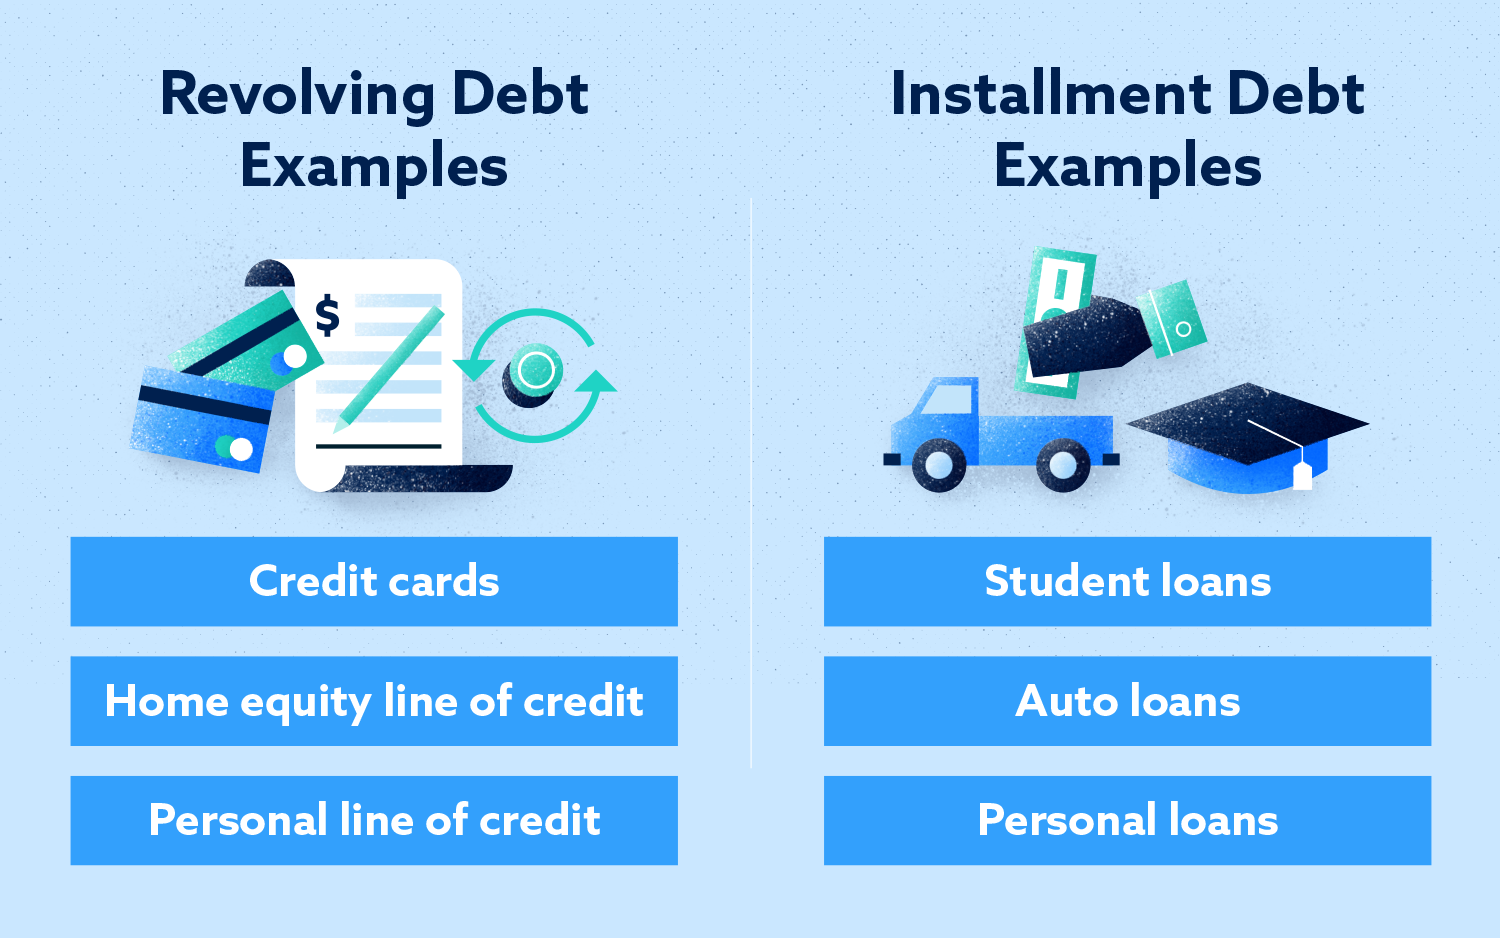 What is Revolving Debt?